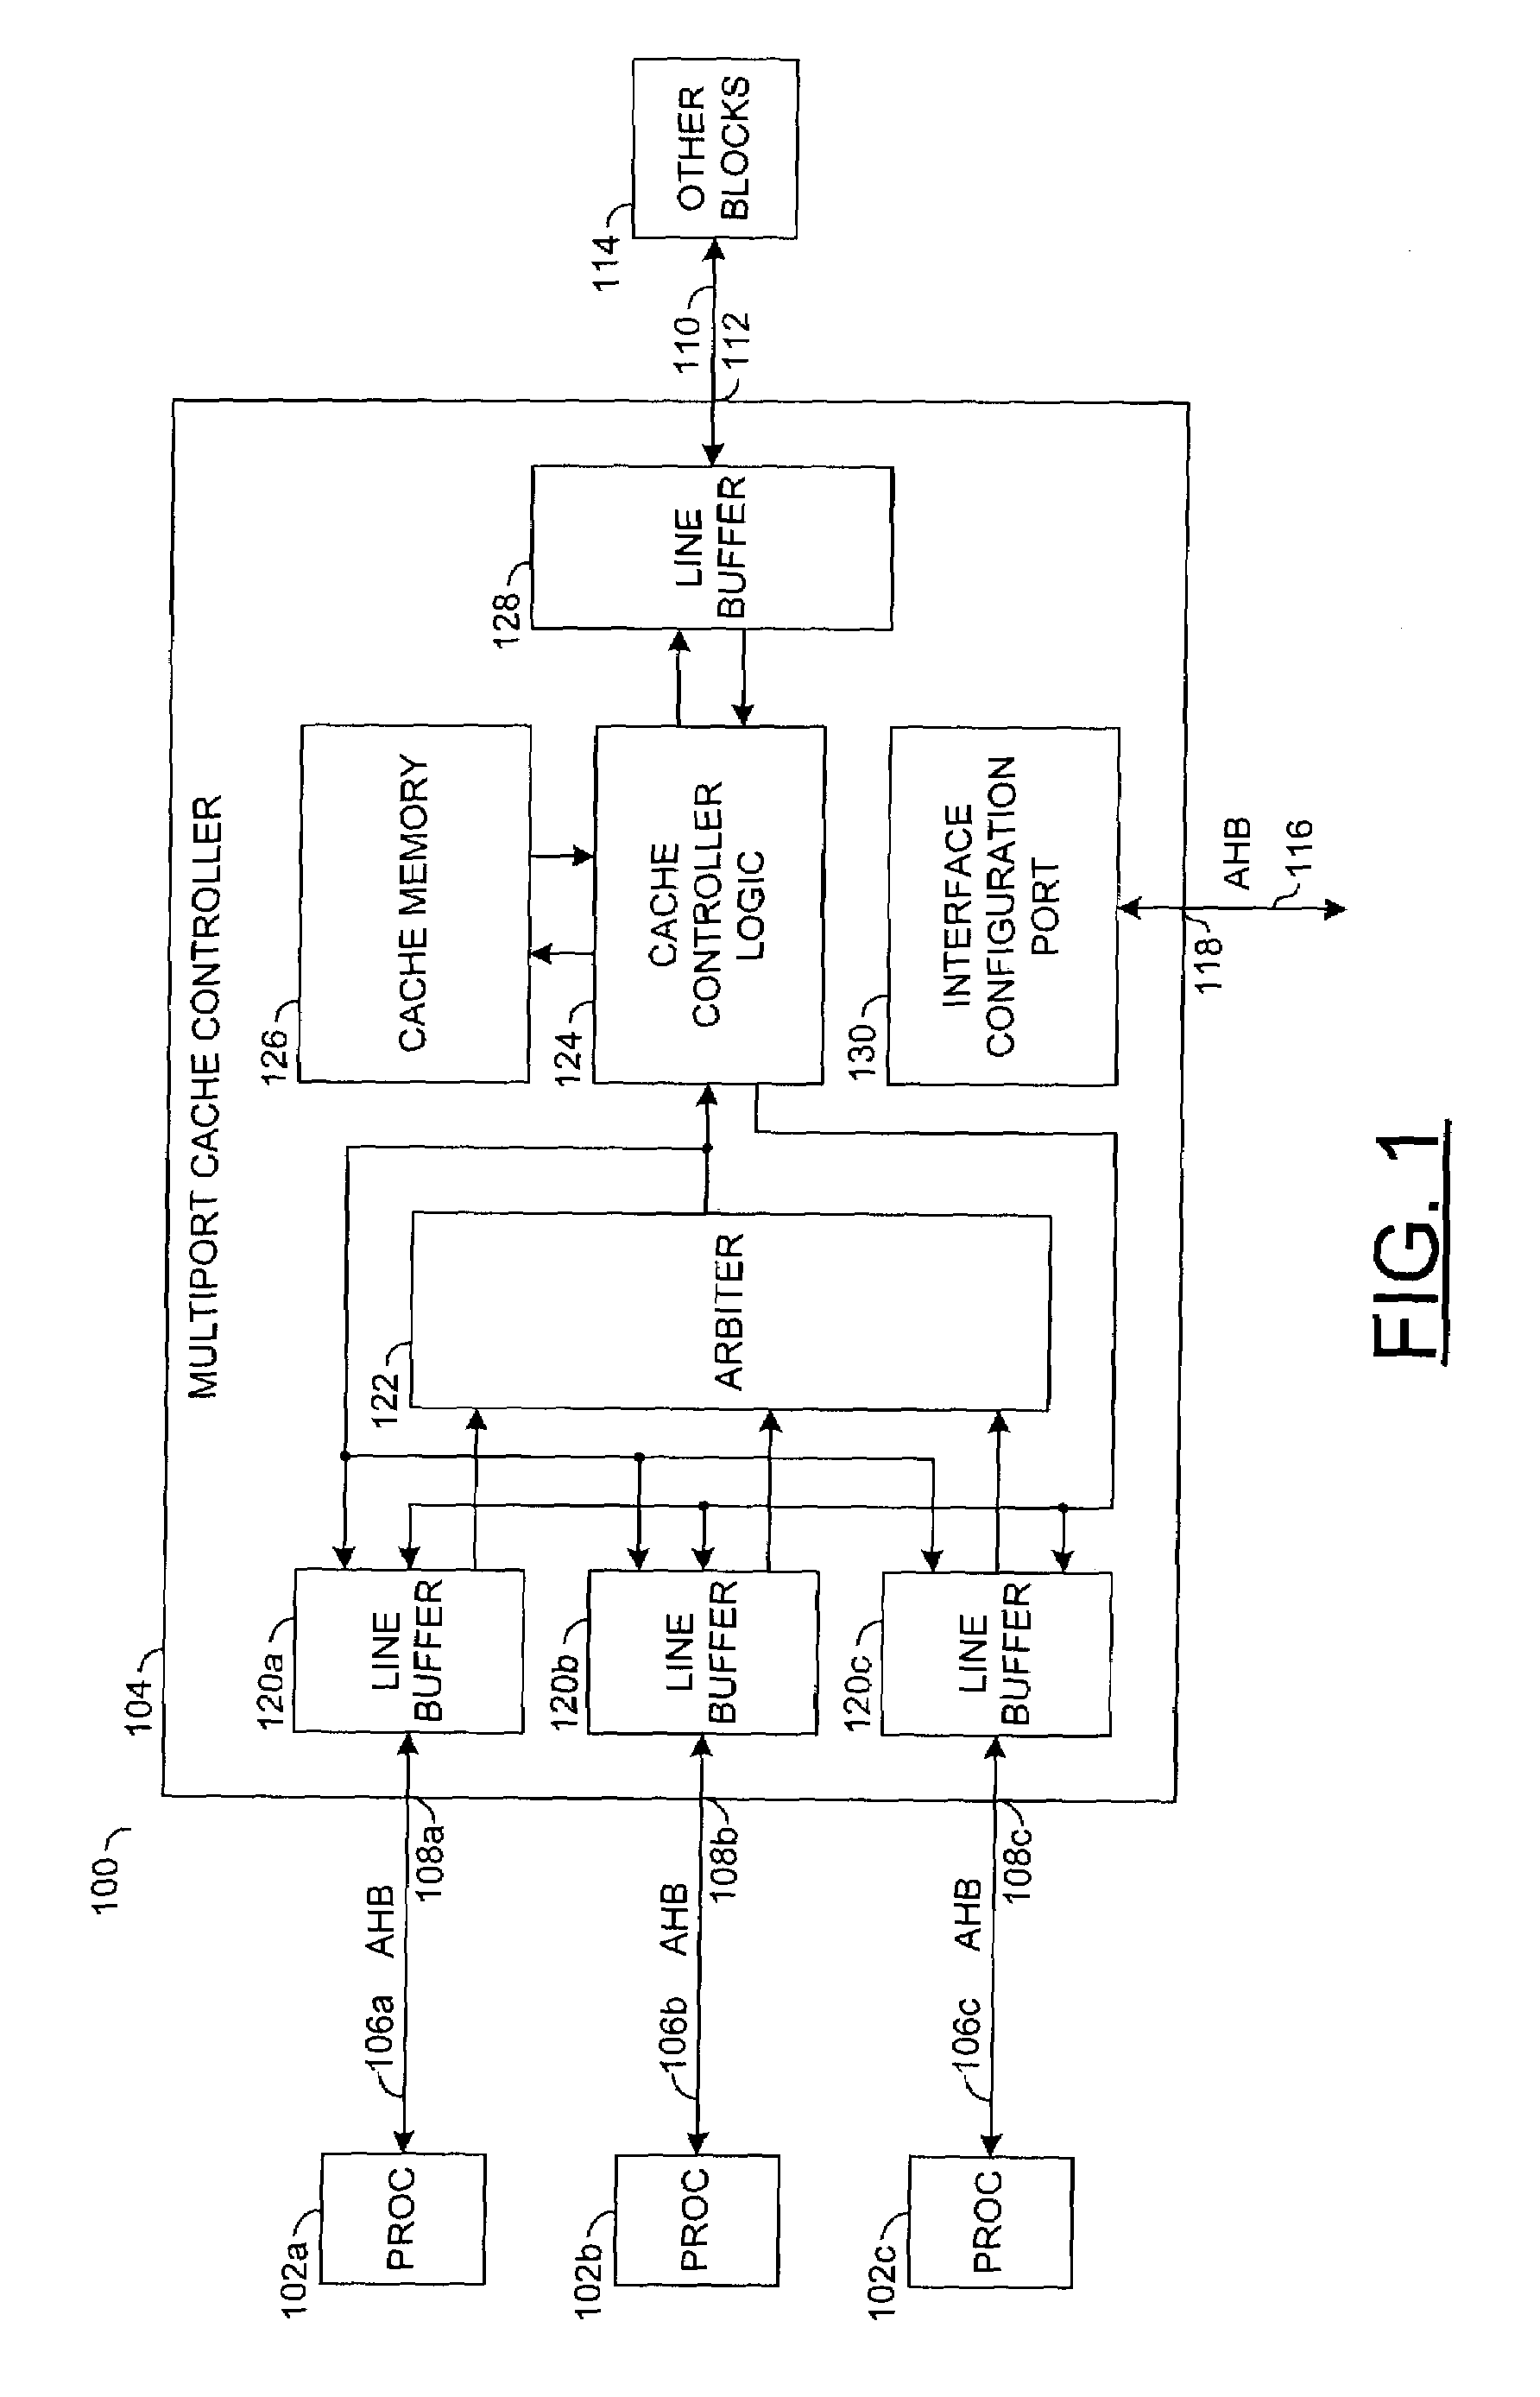 Method for use of ternary CAM to implement software programmable cache policies